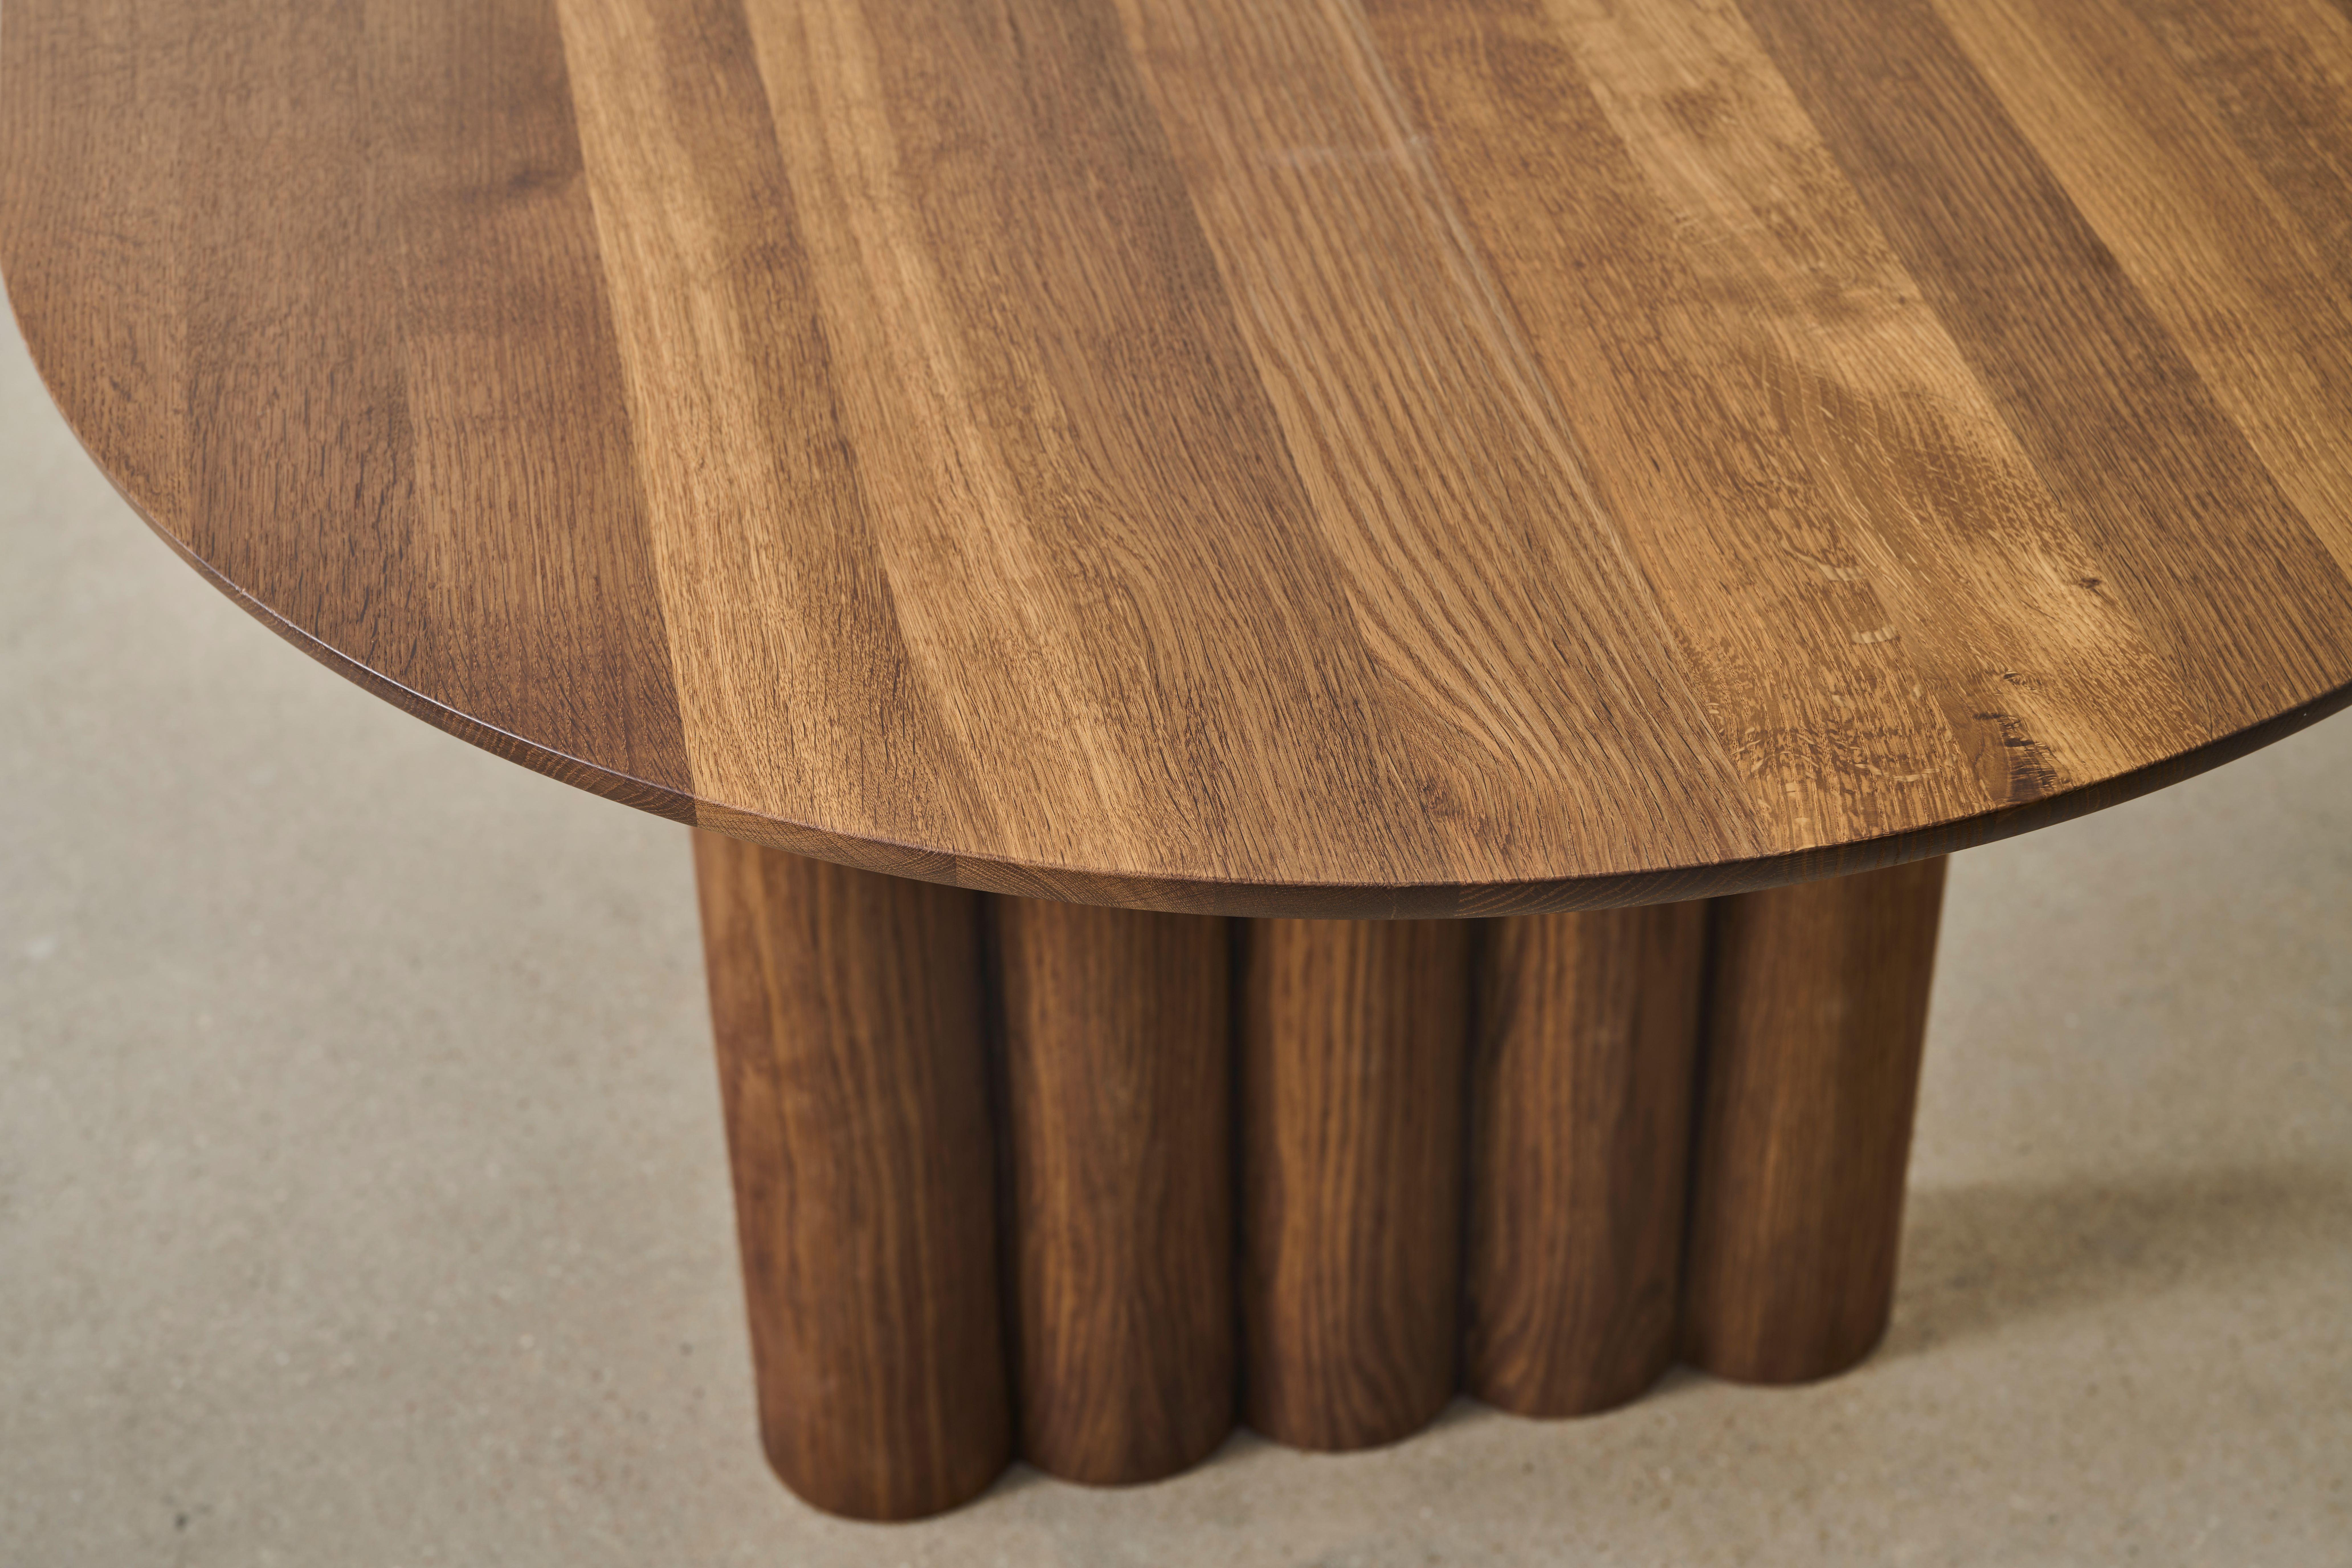 Danish Contemporary Dining Table 'Plush' by Dk3, Smoked Oak or Walnut, 400 For Sale